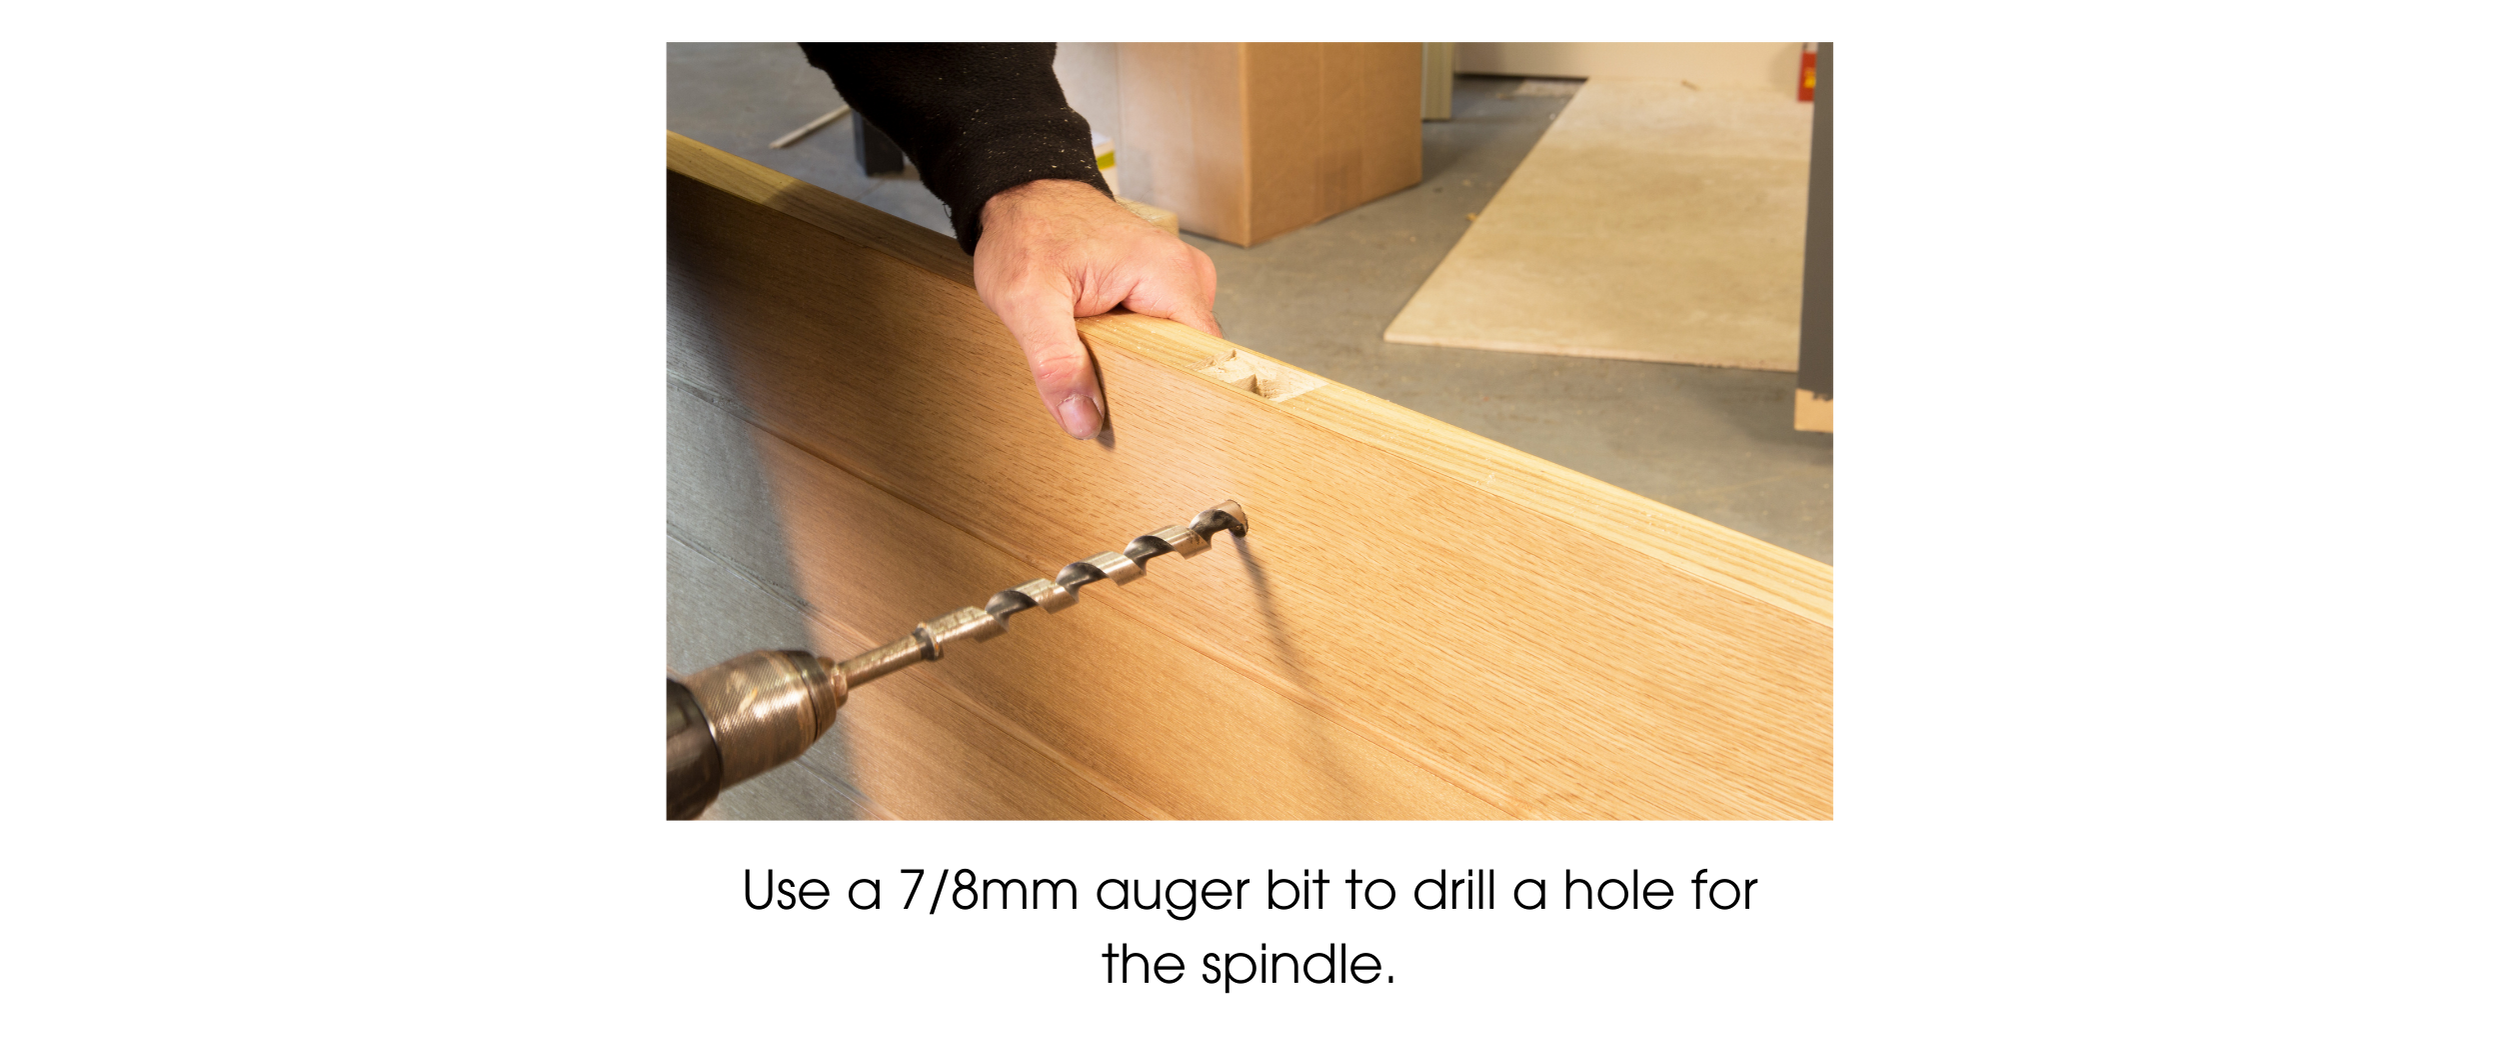 Person using an auger drill bit to drill a hole through a wooden door for a spindle to pass.